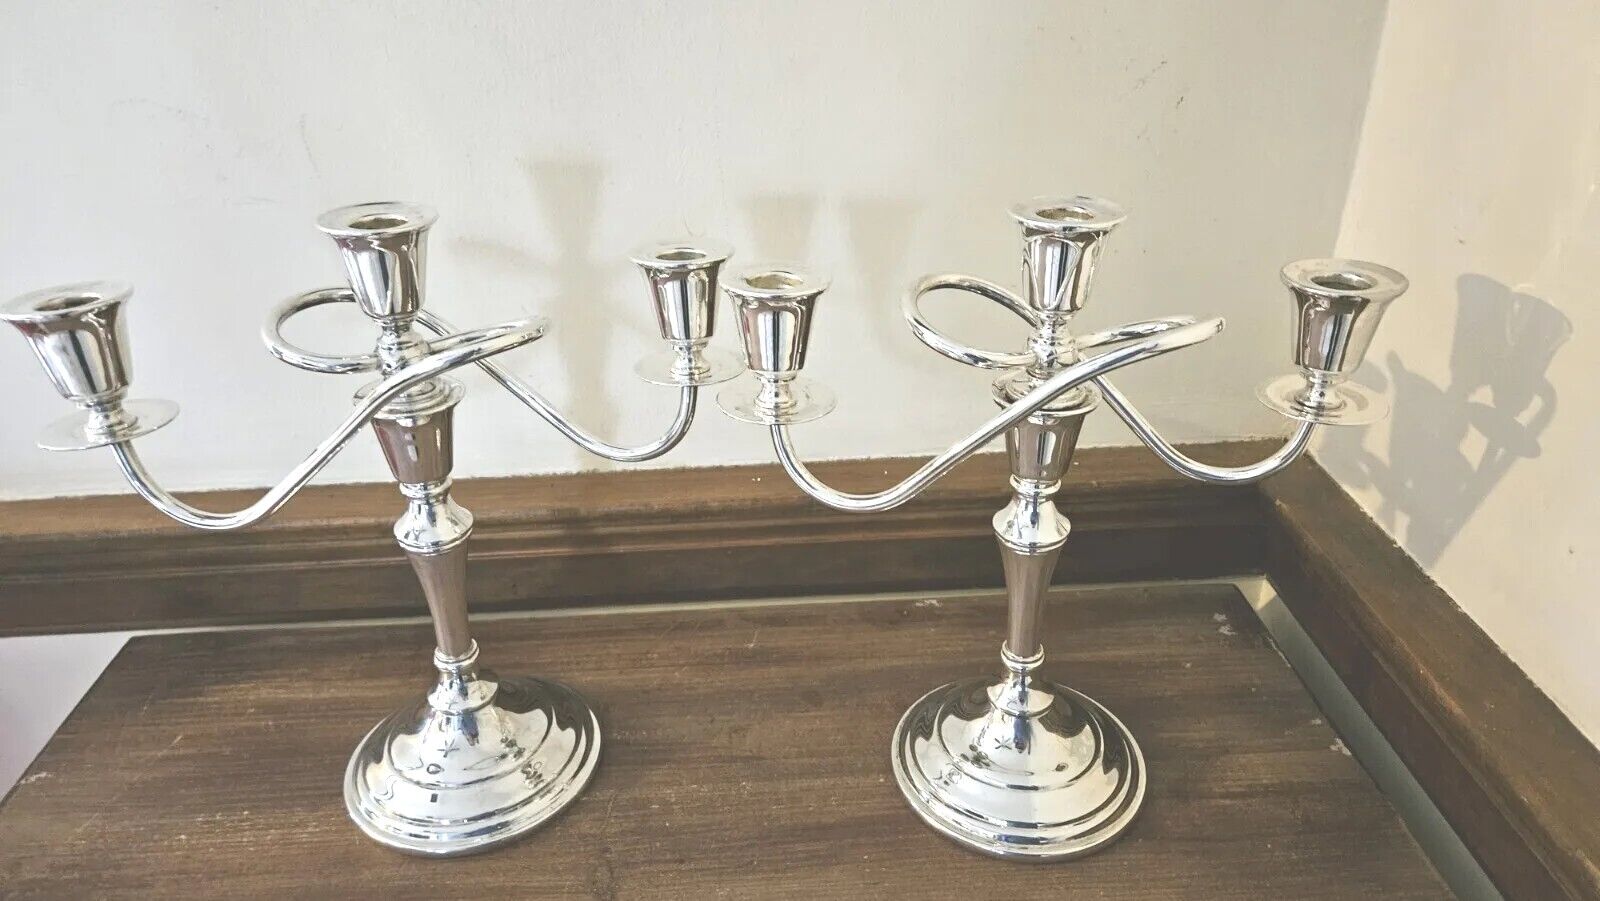 Pair Of Candelabras Exclusively Made For International Silver Co. Silverplate...